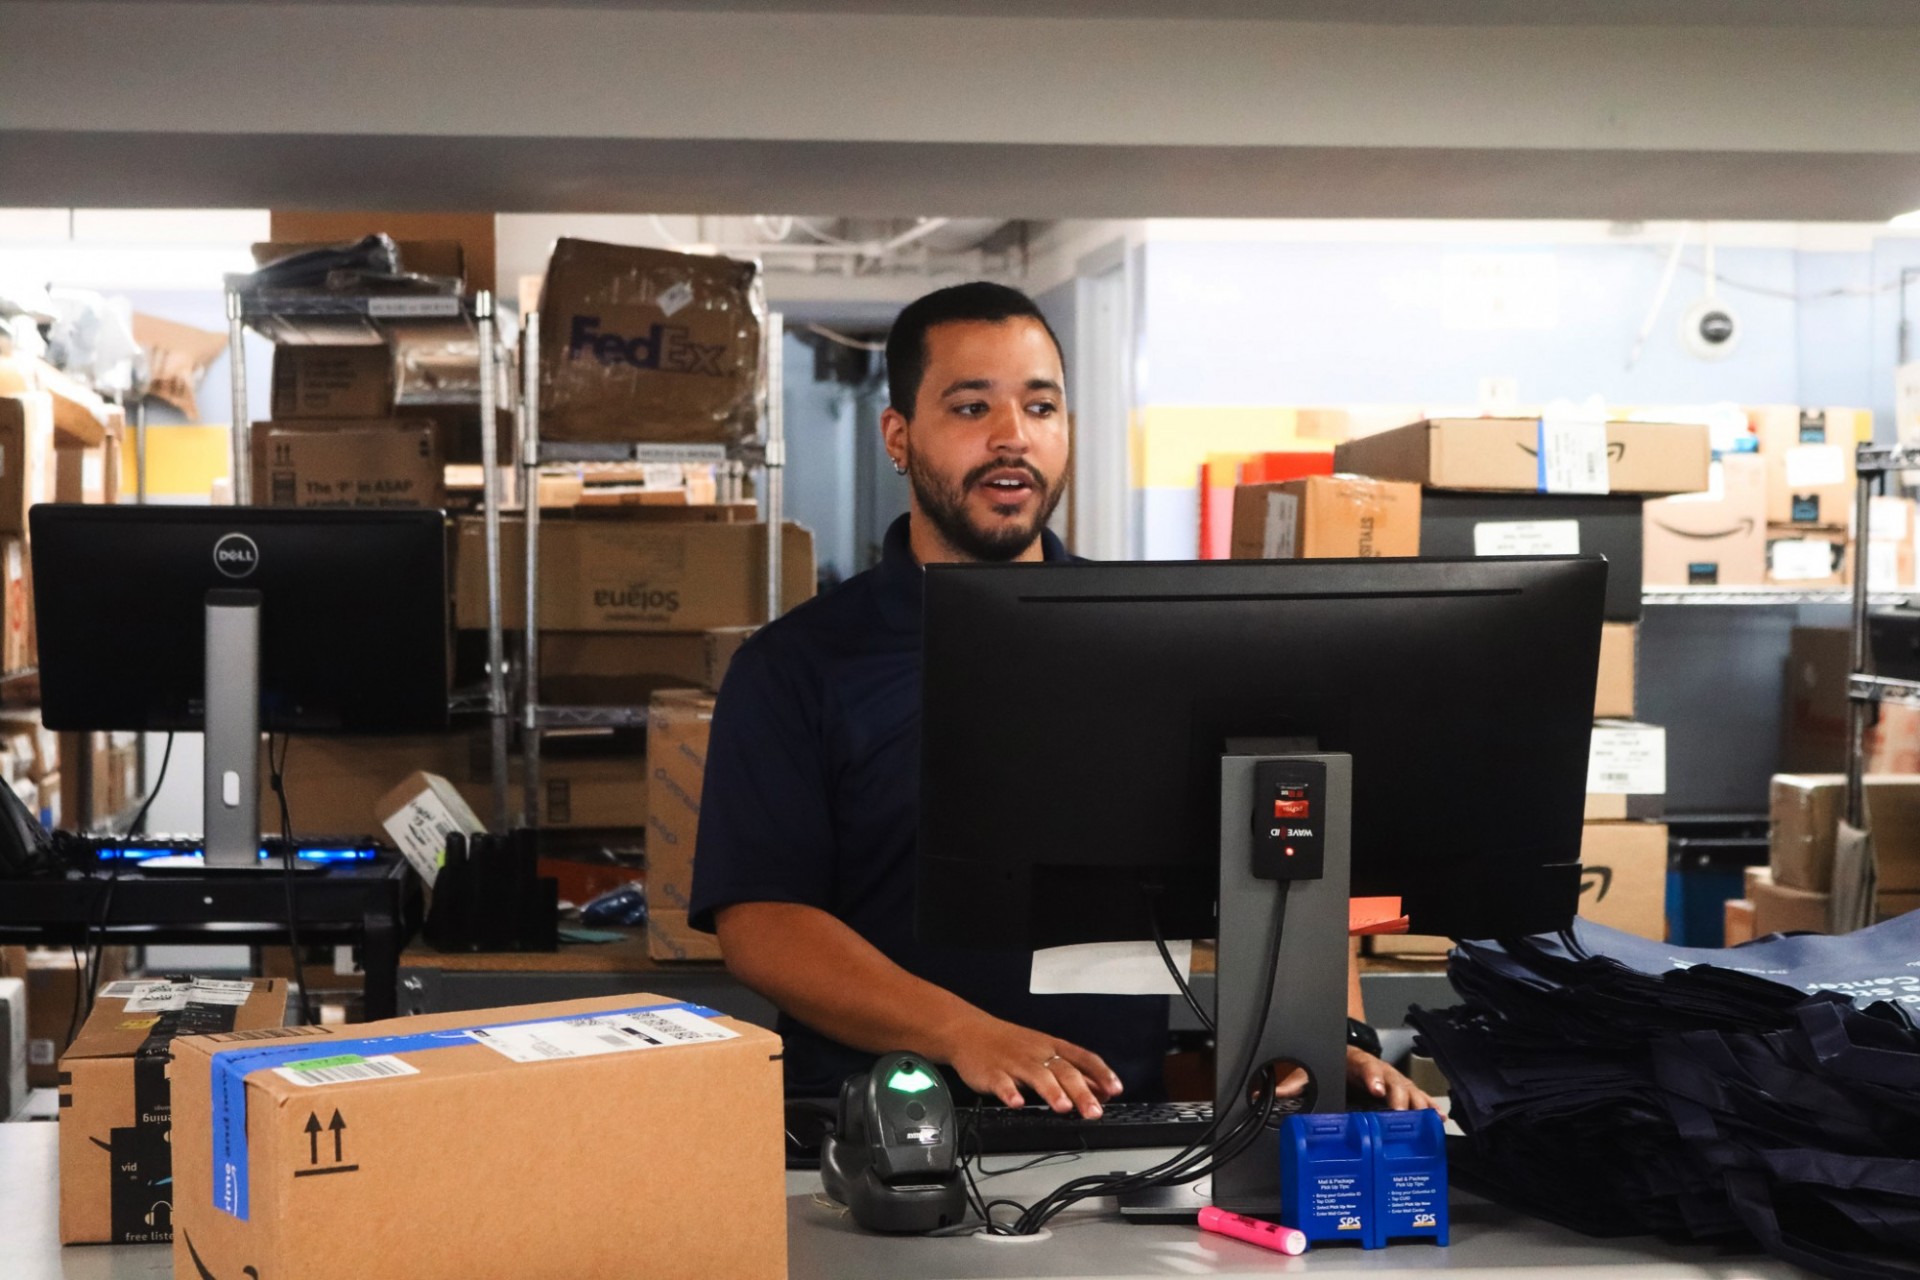 Mail center employee using the computer to find packages for a recipient